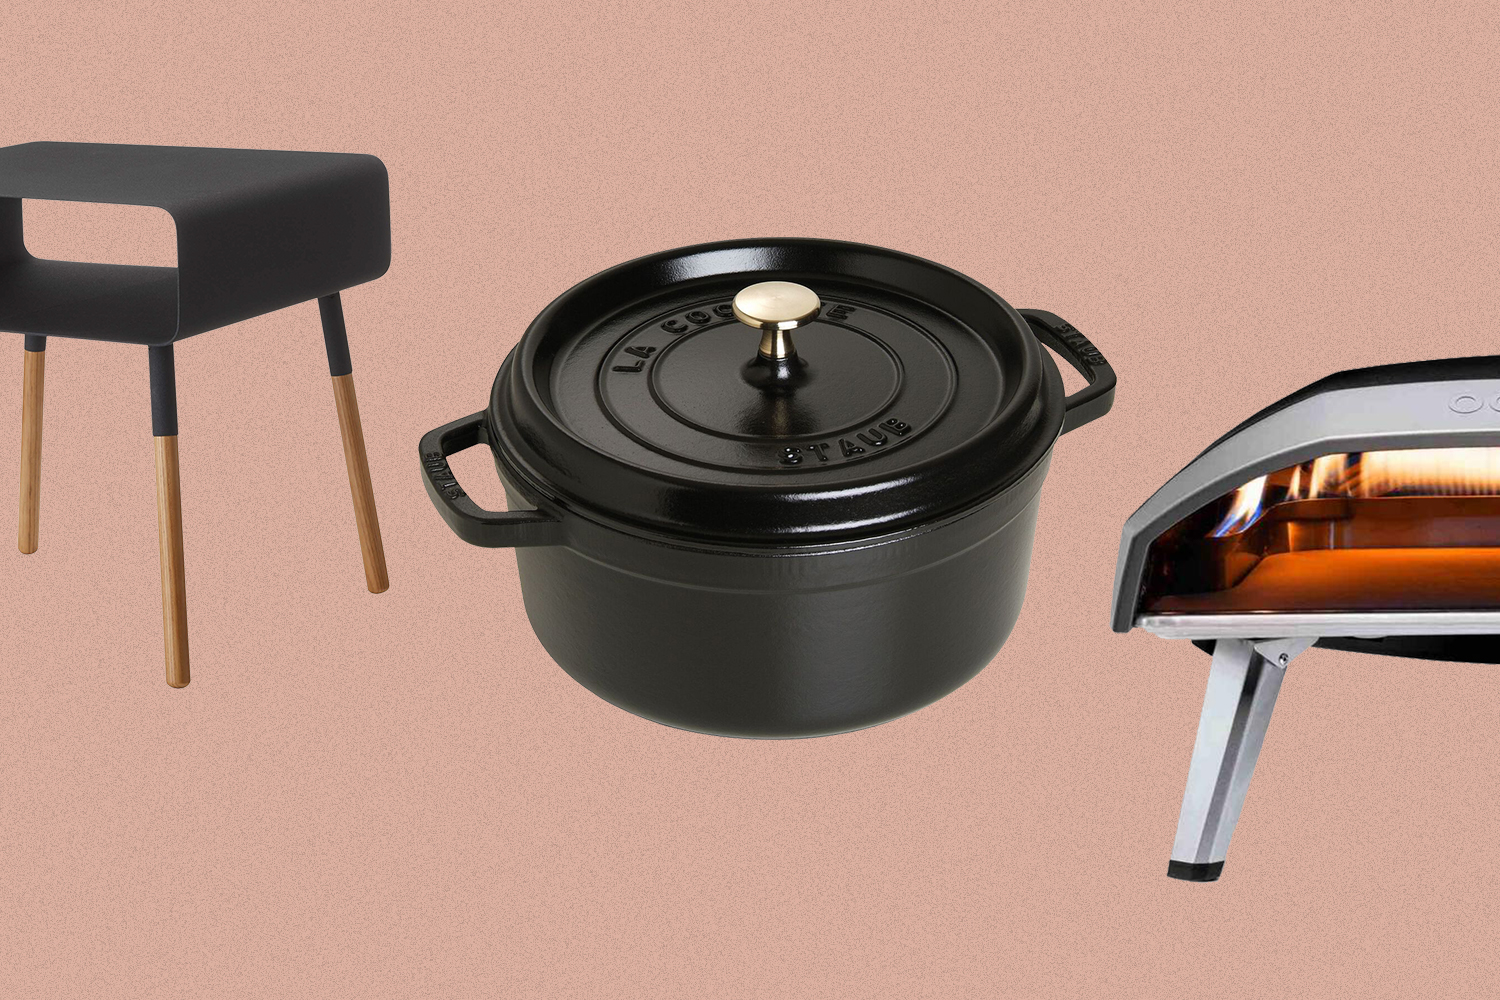 The best Cyber Monday deals on kitchen and home goods - Vancouver Is Awesome